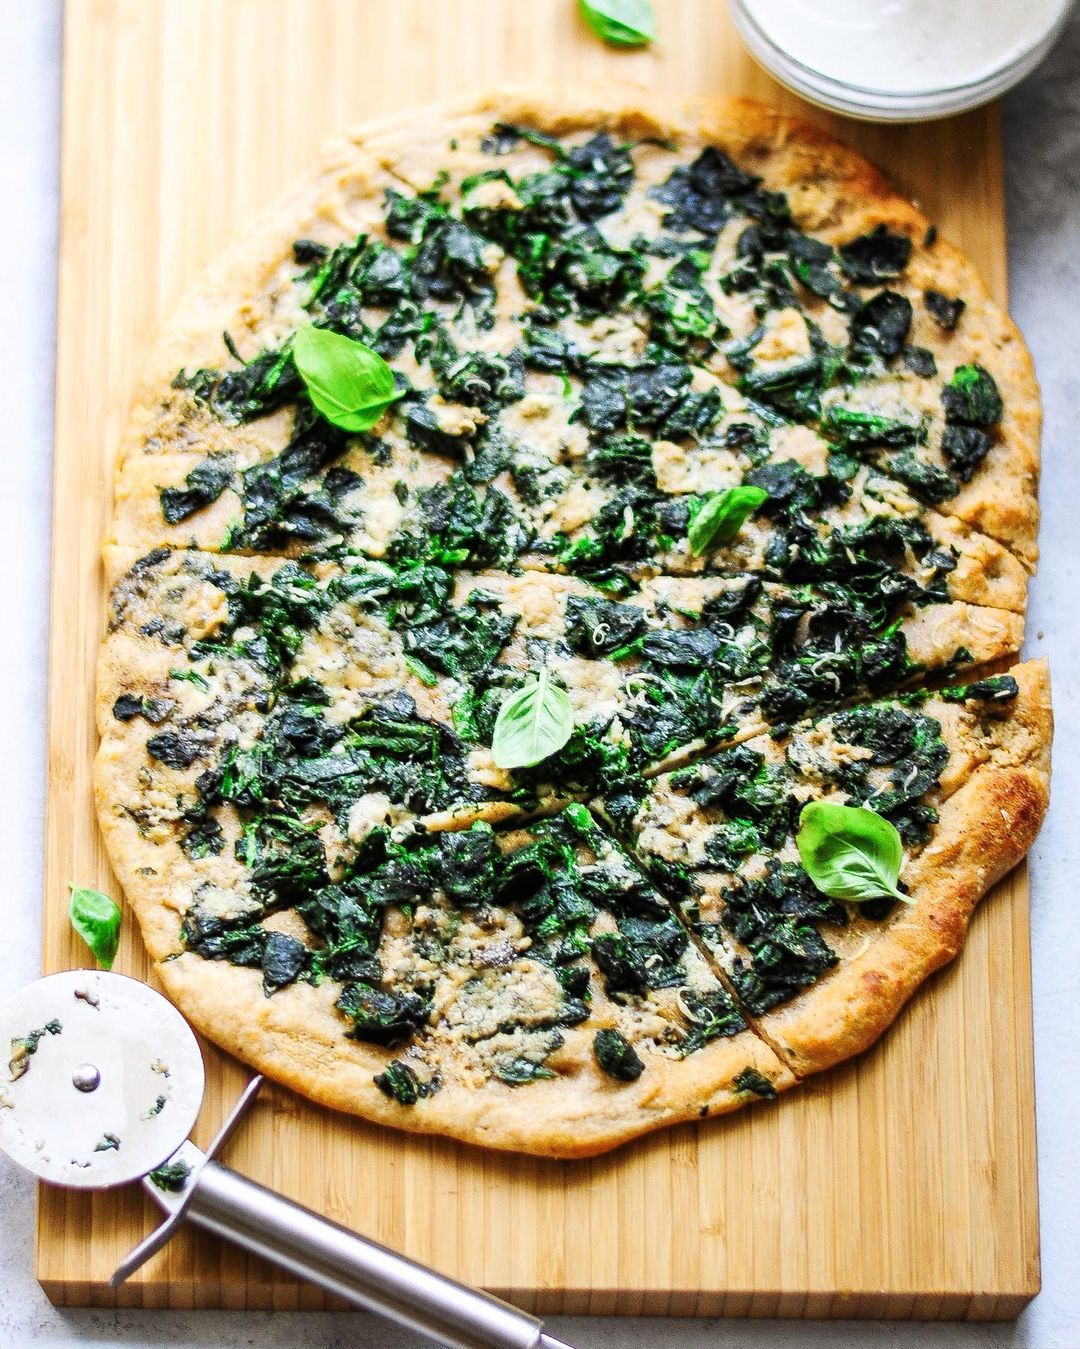 Vegan Kale- Spinach Pizza with Garlicky Cheese